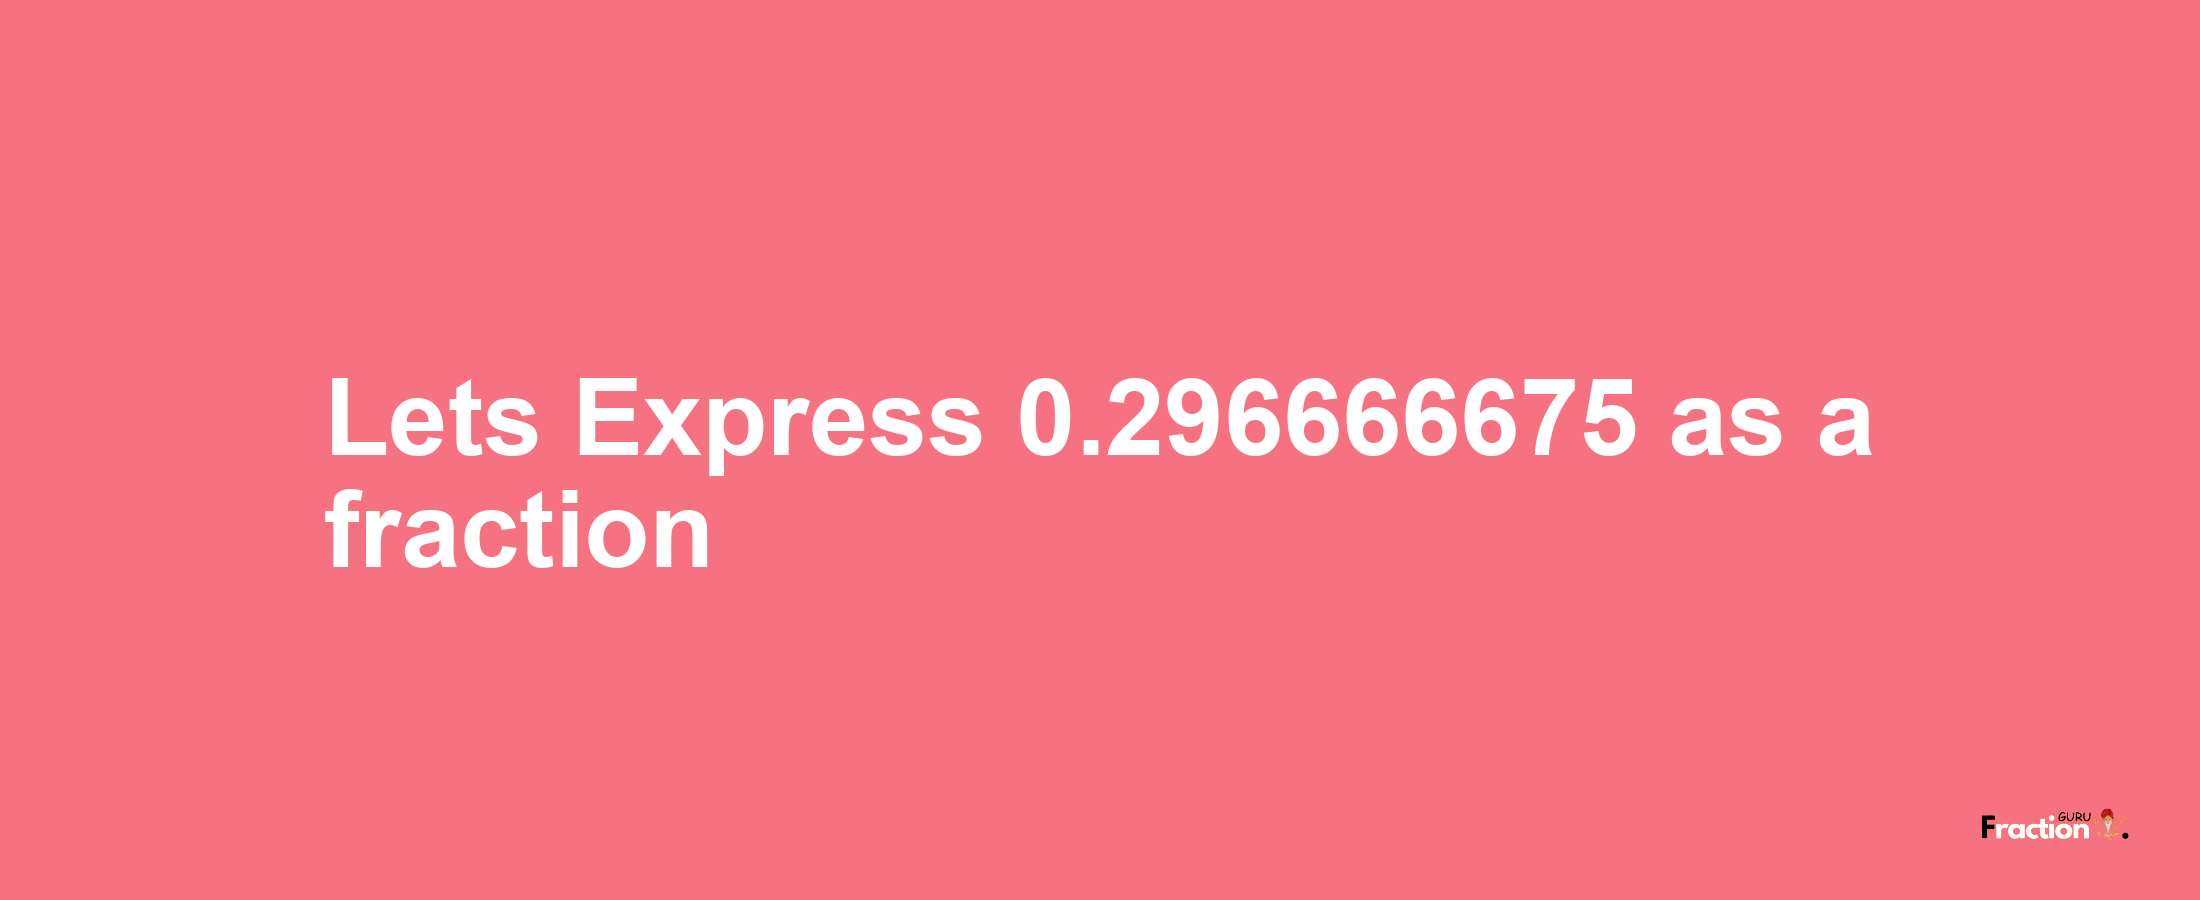 Lets Express 0.296666675 as afraction